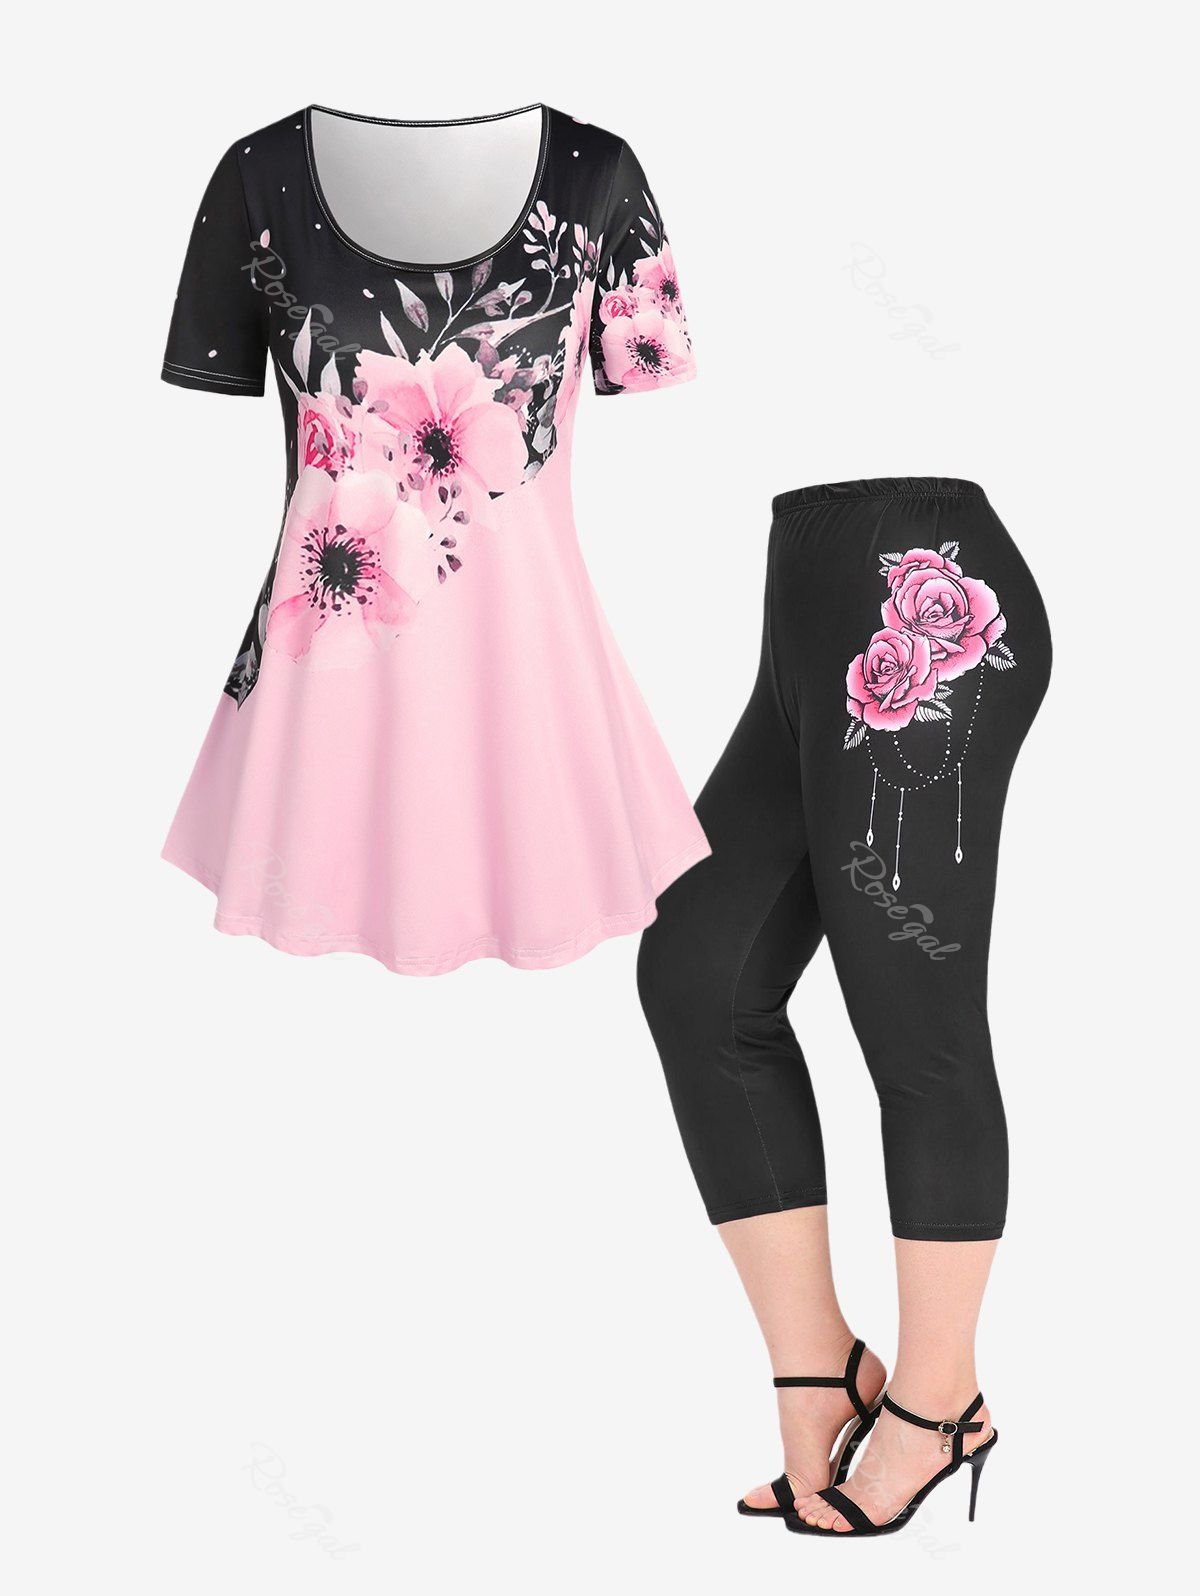 Sale Floral Print Colorblock Tee and Floral Print High Waisted Capri Leggings Plus Size Summer Outfit  